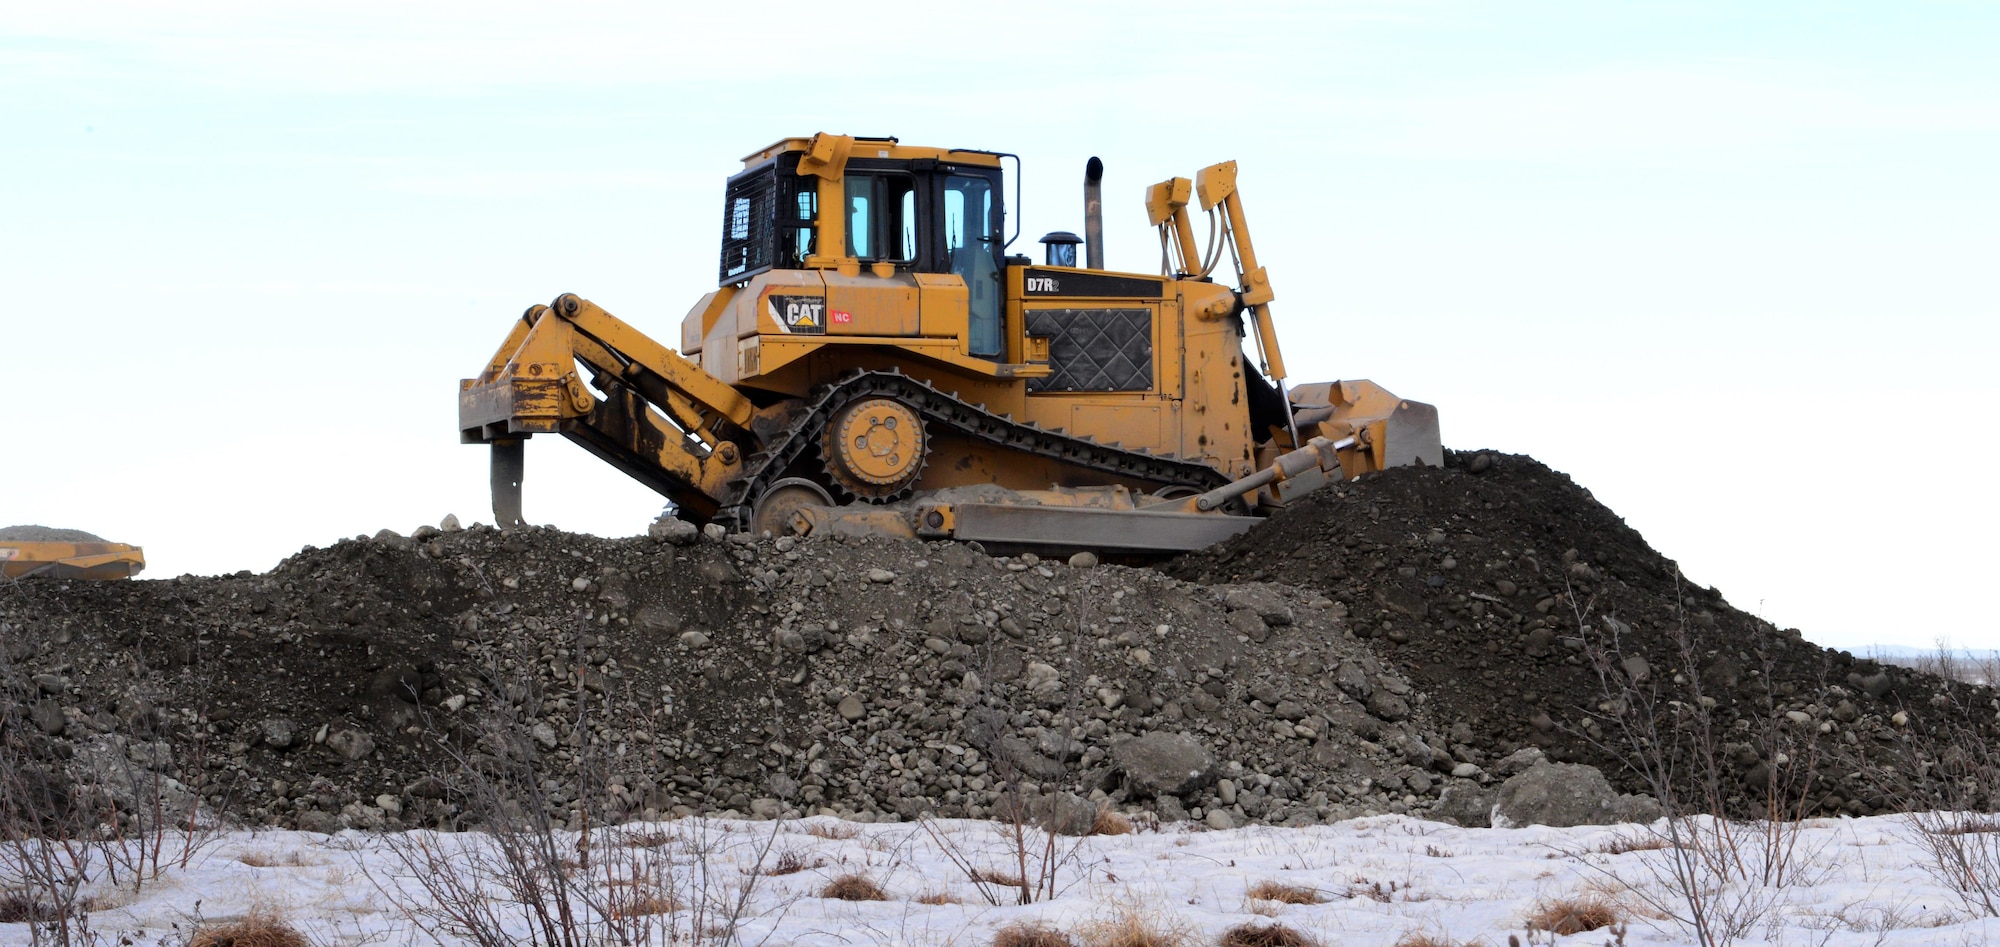 A bulldozer operated by a 354th Civil Engineer Squadron “dirt boy”, pushes dirt into place to create a trail system March 2, 2016, in Delta Junction, Alaska. The 354th CES “dirt boyz” and structural craftsman Airmen work for approximately 38 days to prepare the Oklahoma Range for RED FLAG-Alaska’s strategic training mission. (U.S. Air Force photo by Airman 1st Class Cassandra Whitman/Released)